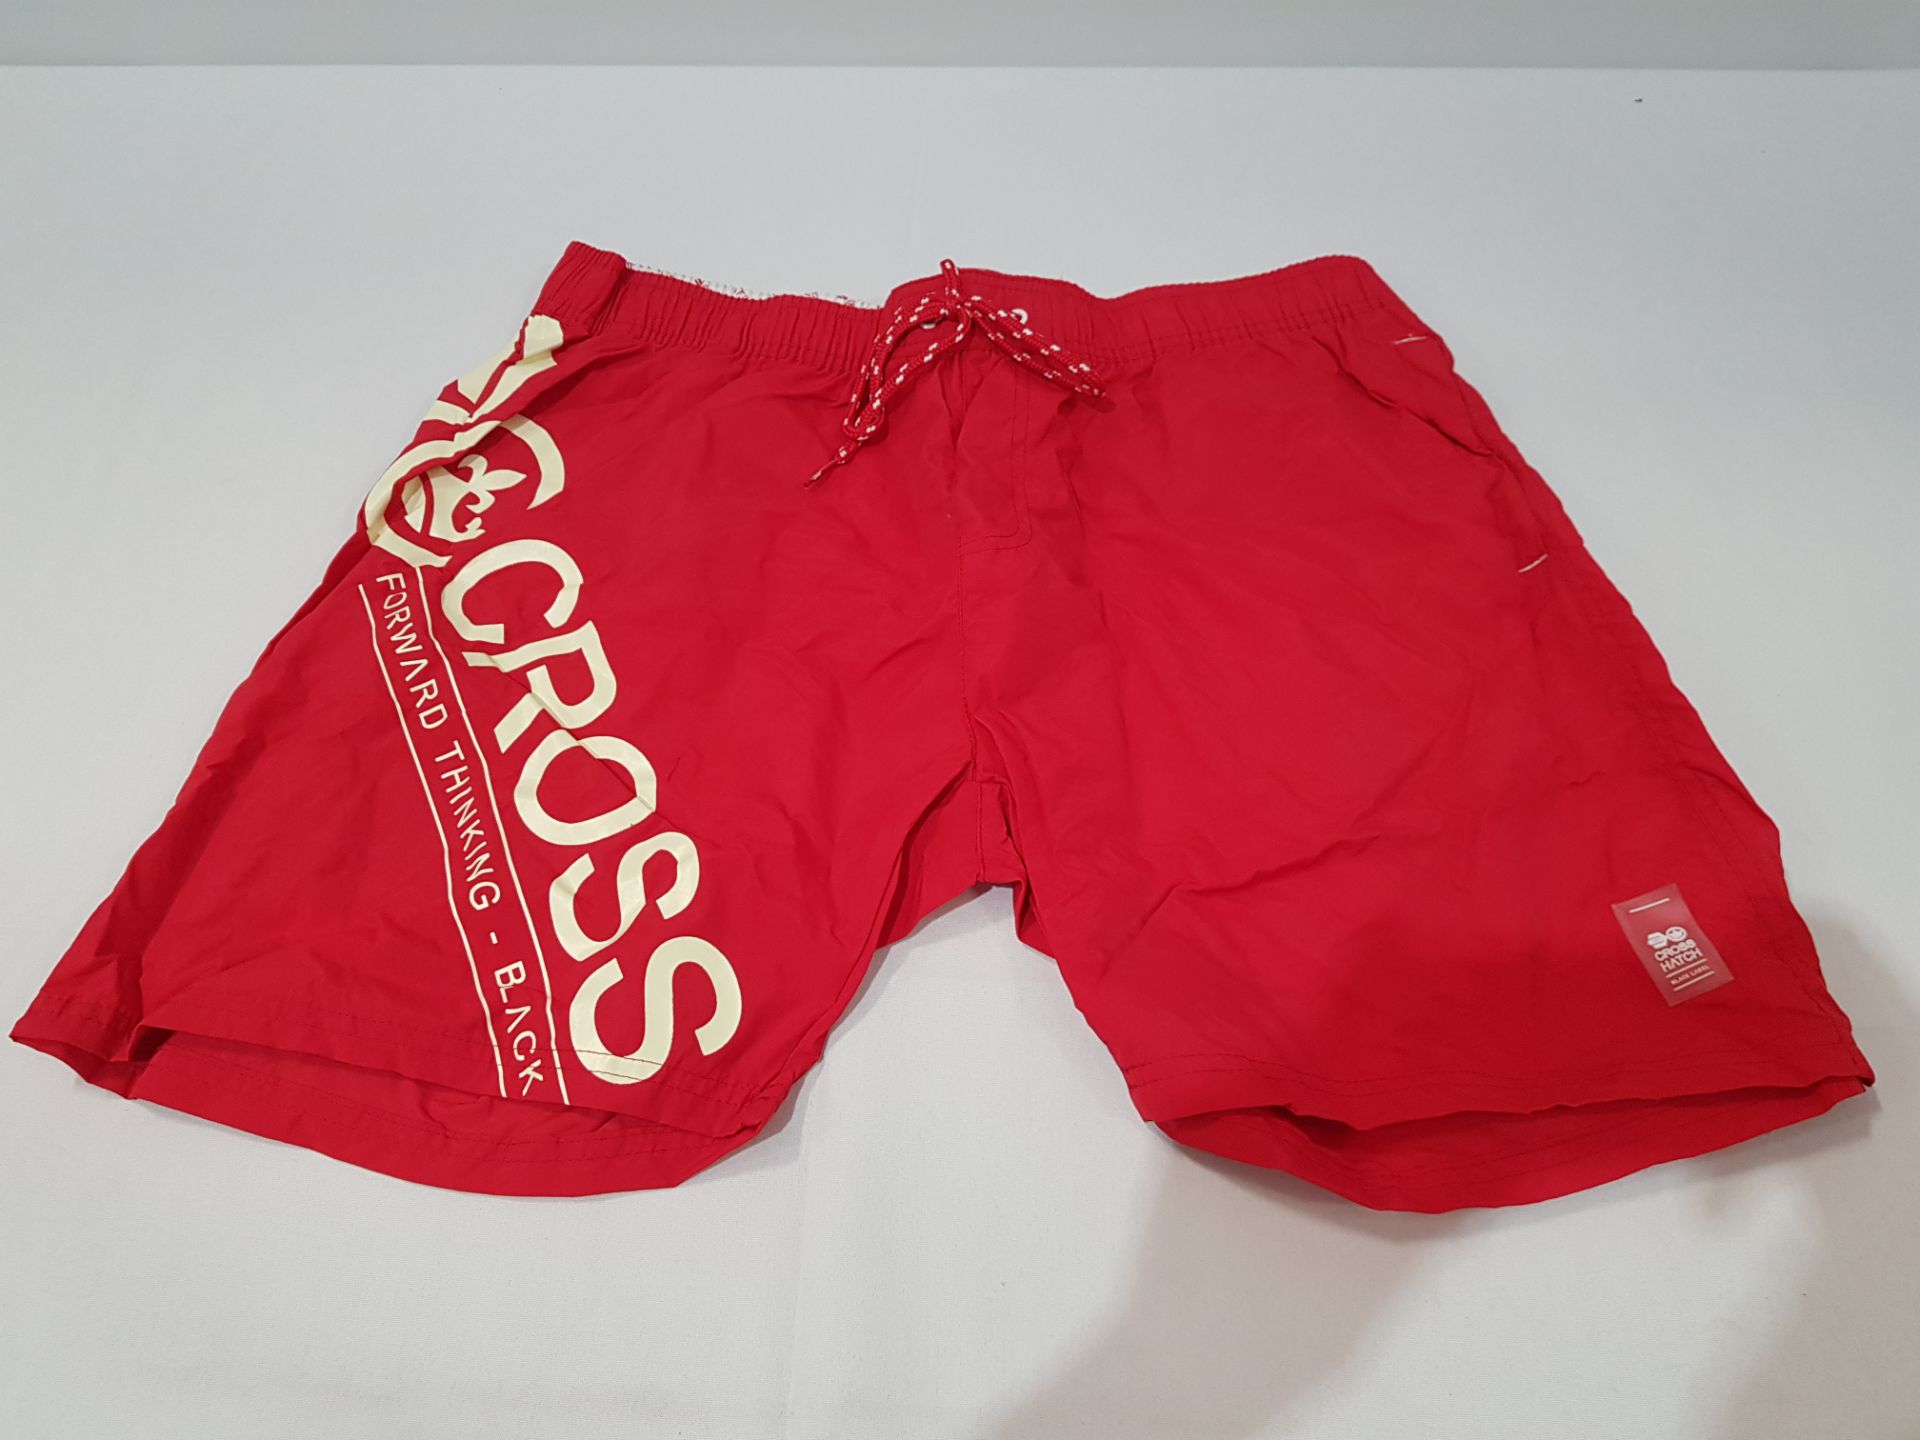 12 X BRAND NEW CROSSHATCH DESIGNER MESH LINED SWIM SHORTS WITH LOGO IN RED SIZES INCLUDE 6 LARGE,